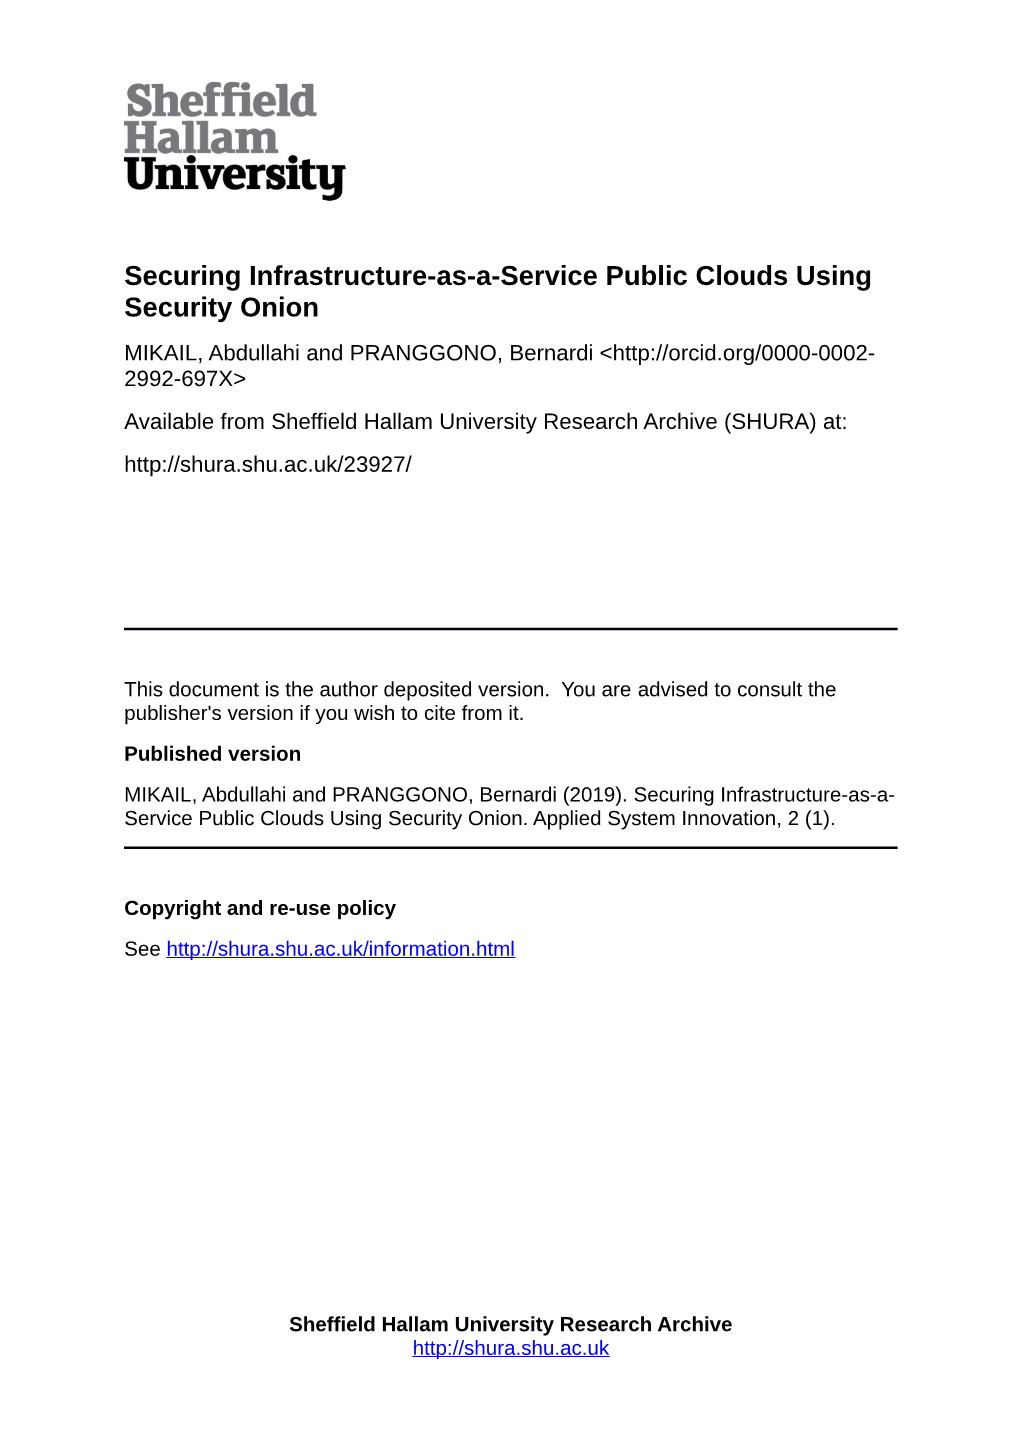 Securing Infrastructure-As-A-Service Public Clouds Using Security Onion